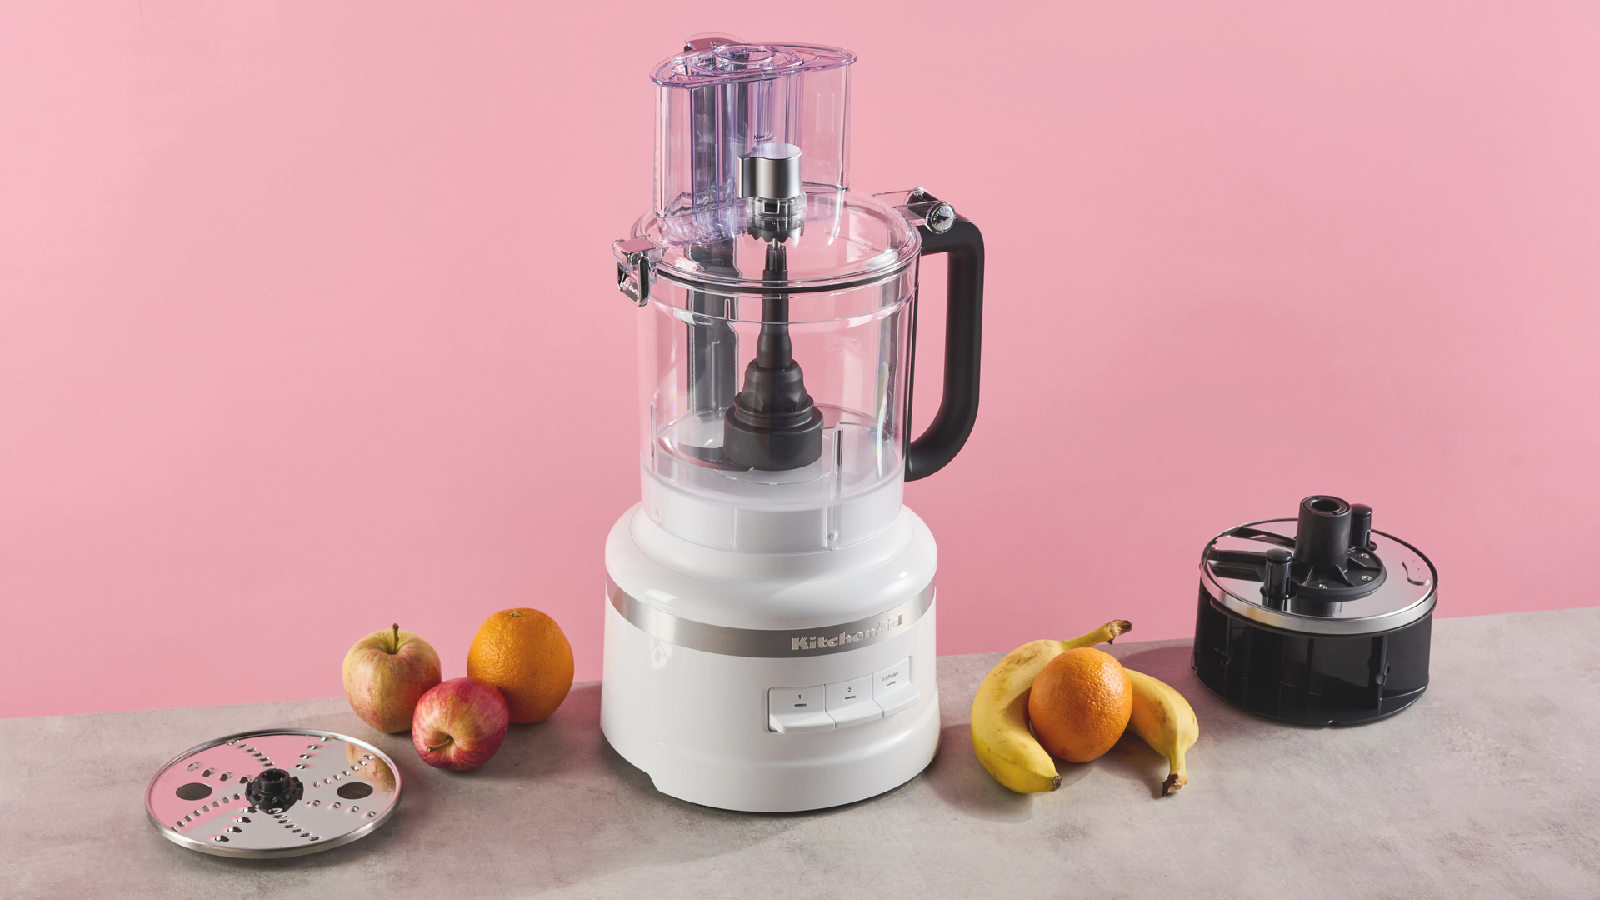 A white KitchenAid Classic 13 cup / 3.1l sitting on a stone effect surface and against a pink background, with the storage caddy containing a reversible slicing disc on the right side, and the reversible grating on the left.disc